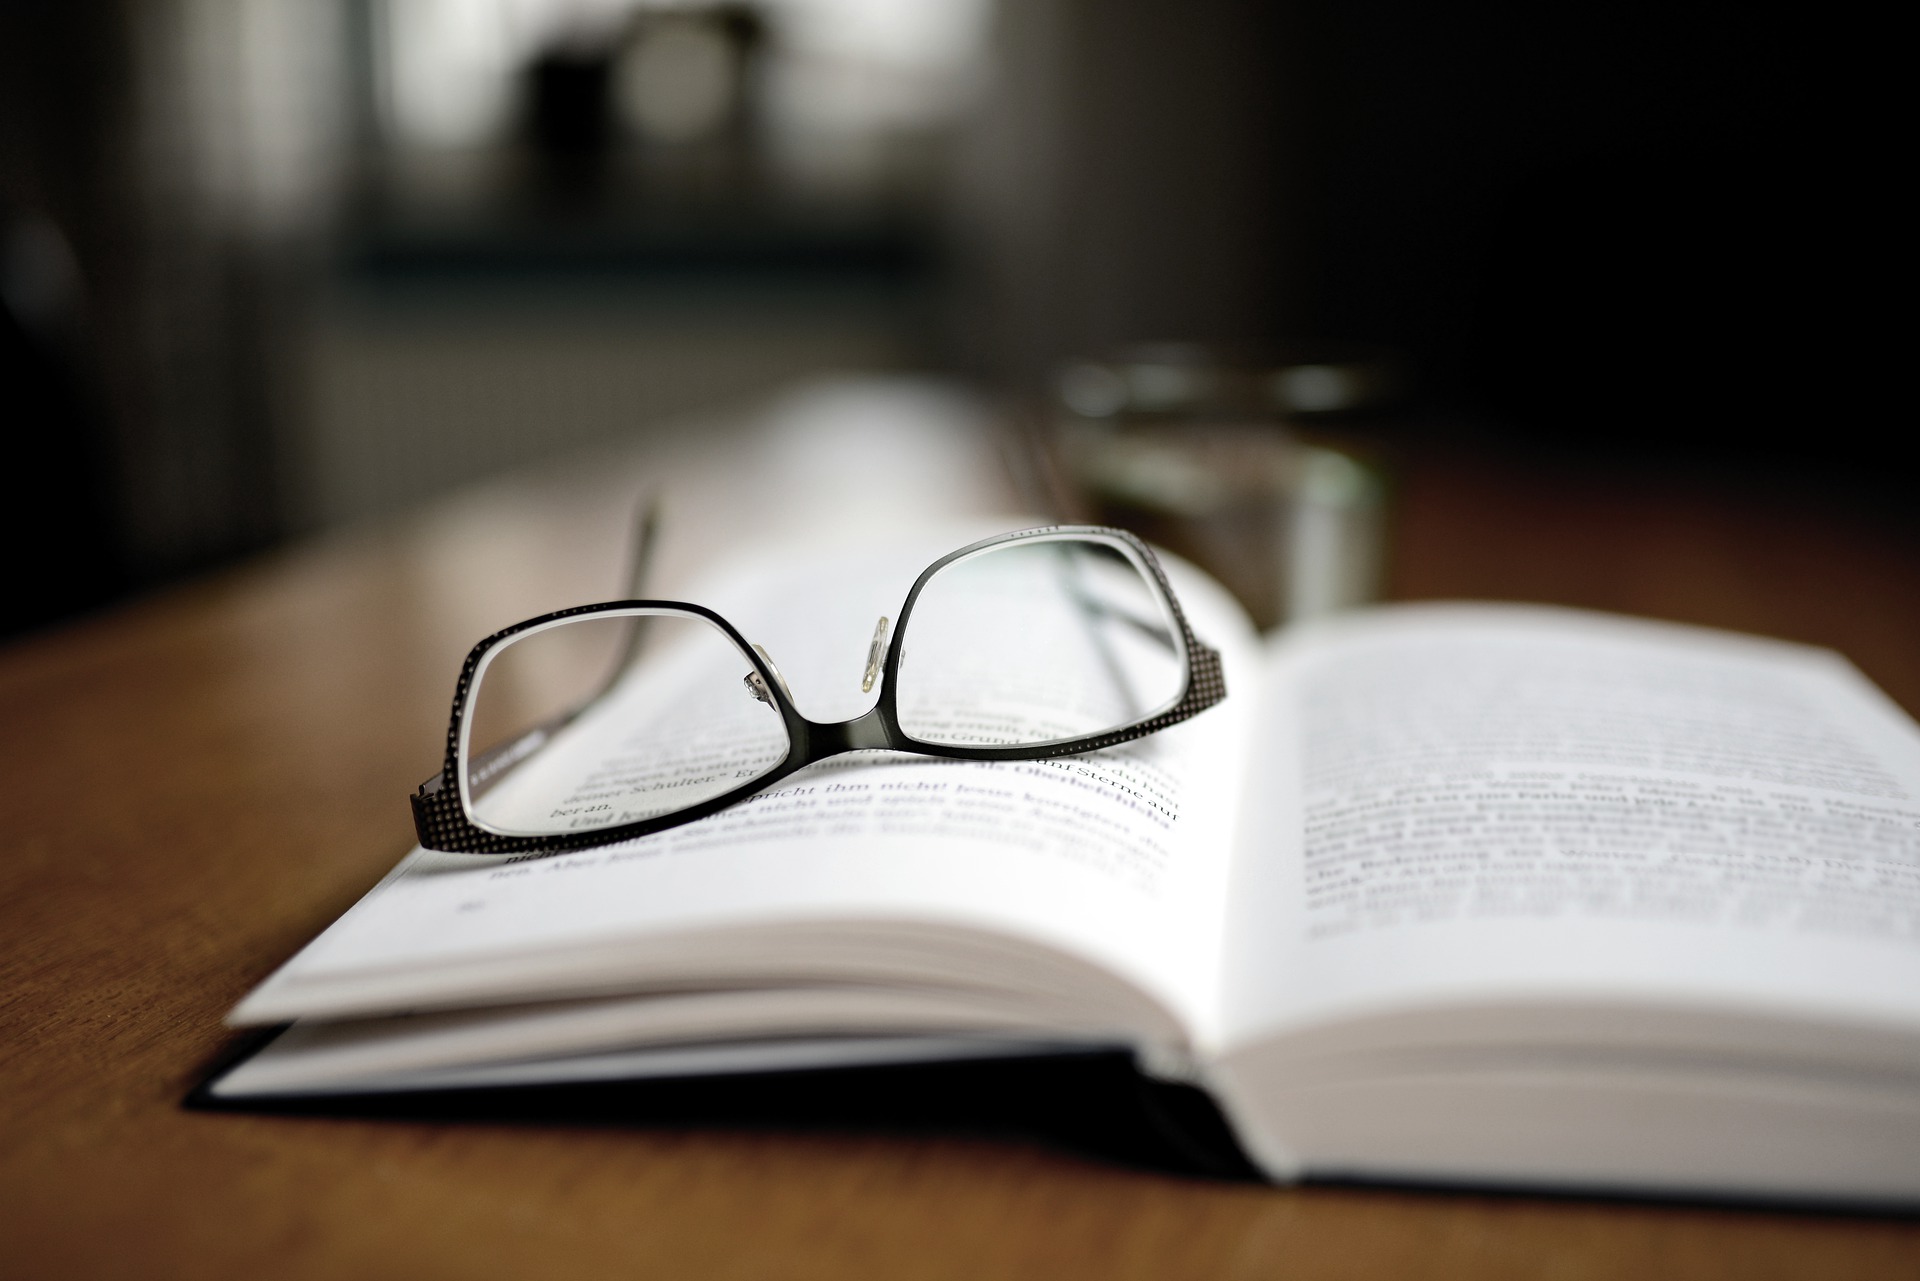 A book and glasses.